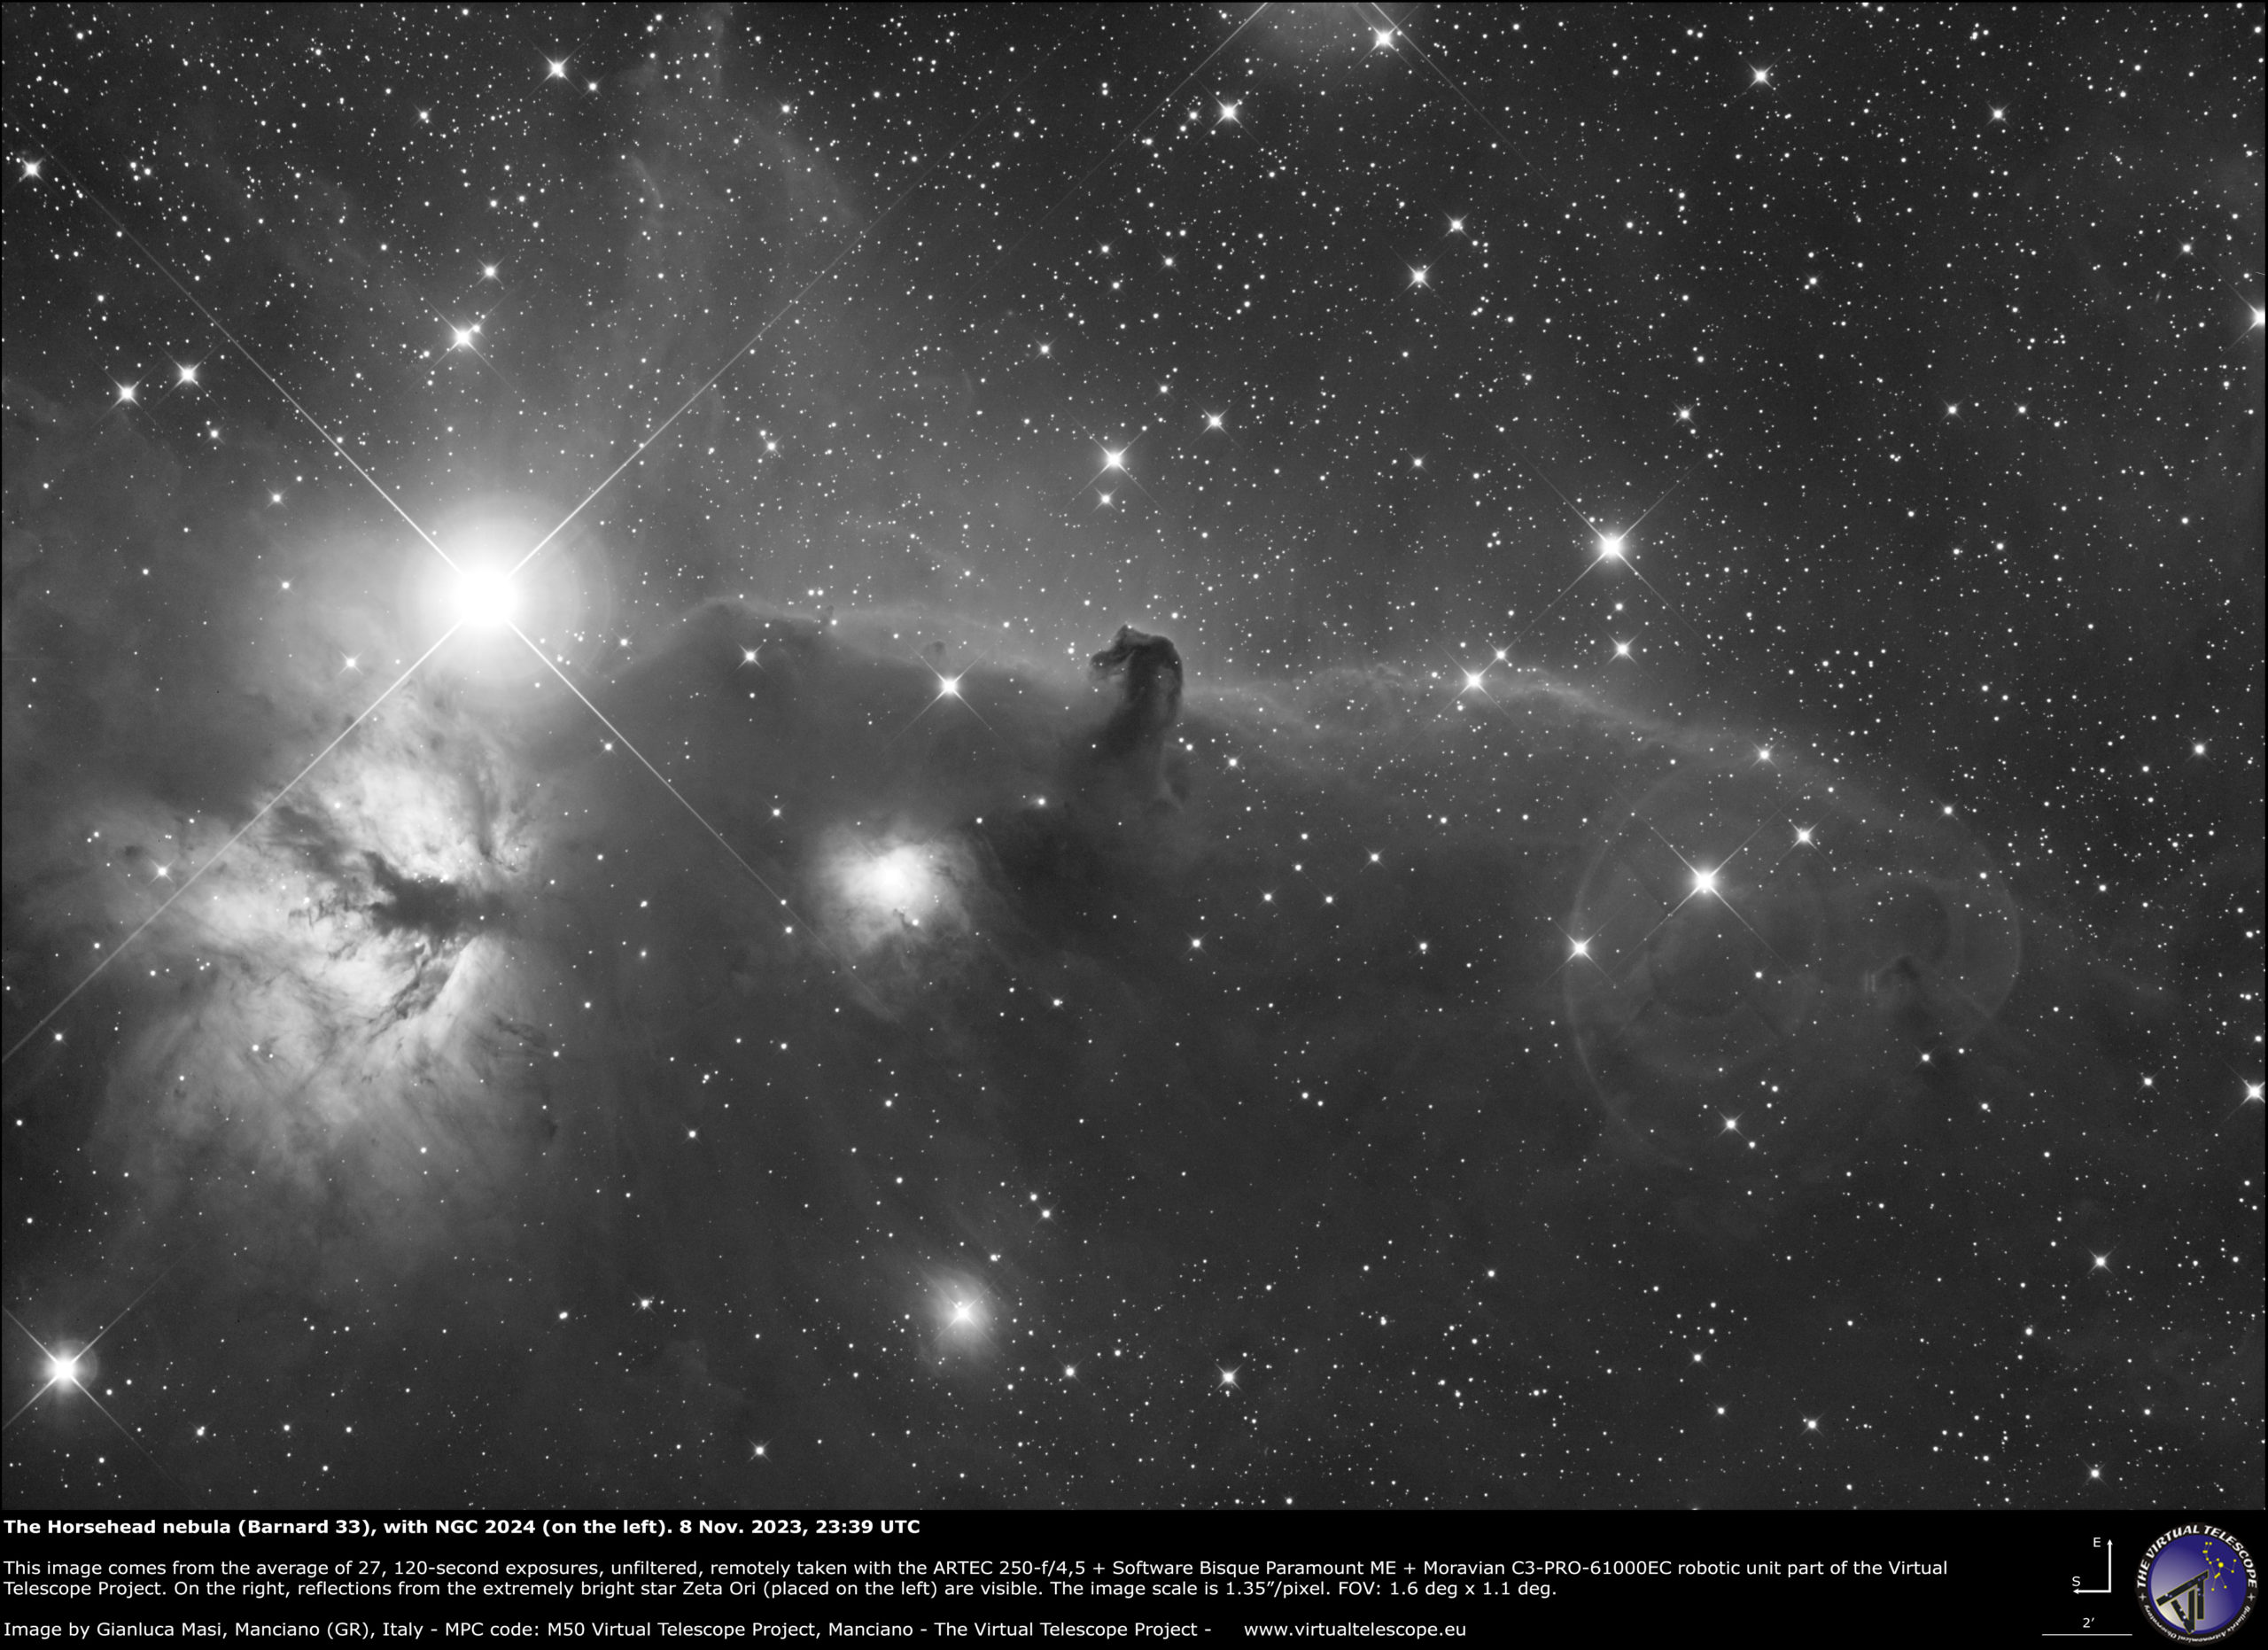 The “Horsehead" (center) and “Flame” (left) nebulae. The very bright star is Zeta Orionis. 8 Nov. 3023.